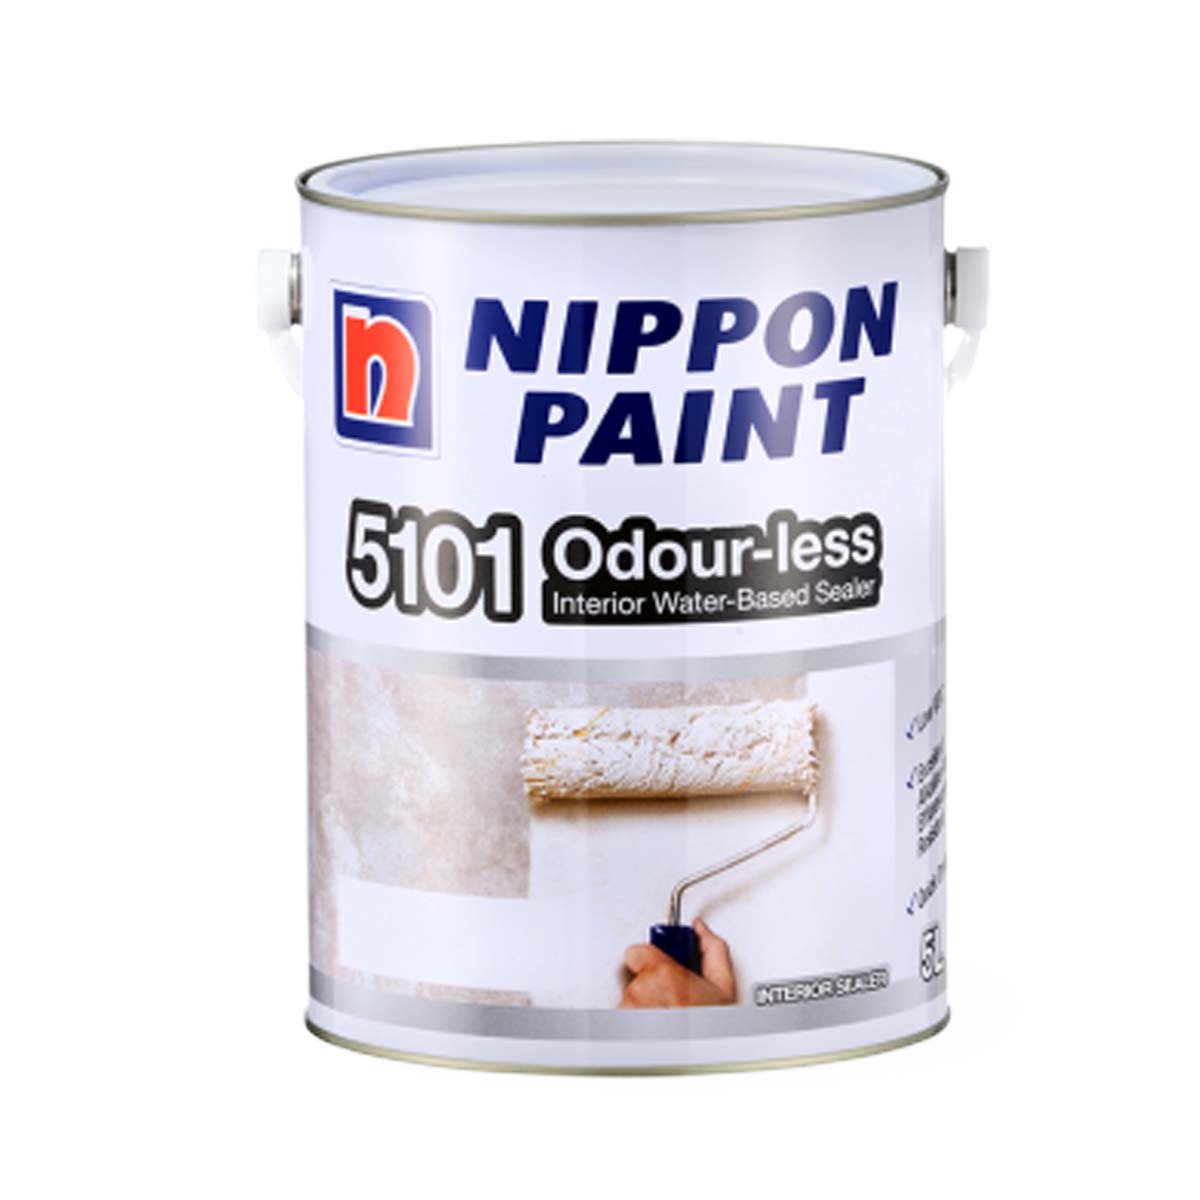 Nippon 5101 Odour-less Wall Sealer